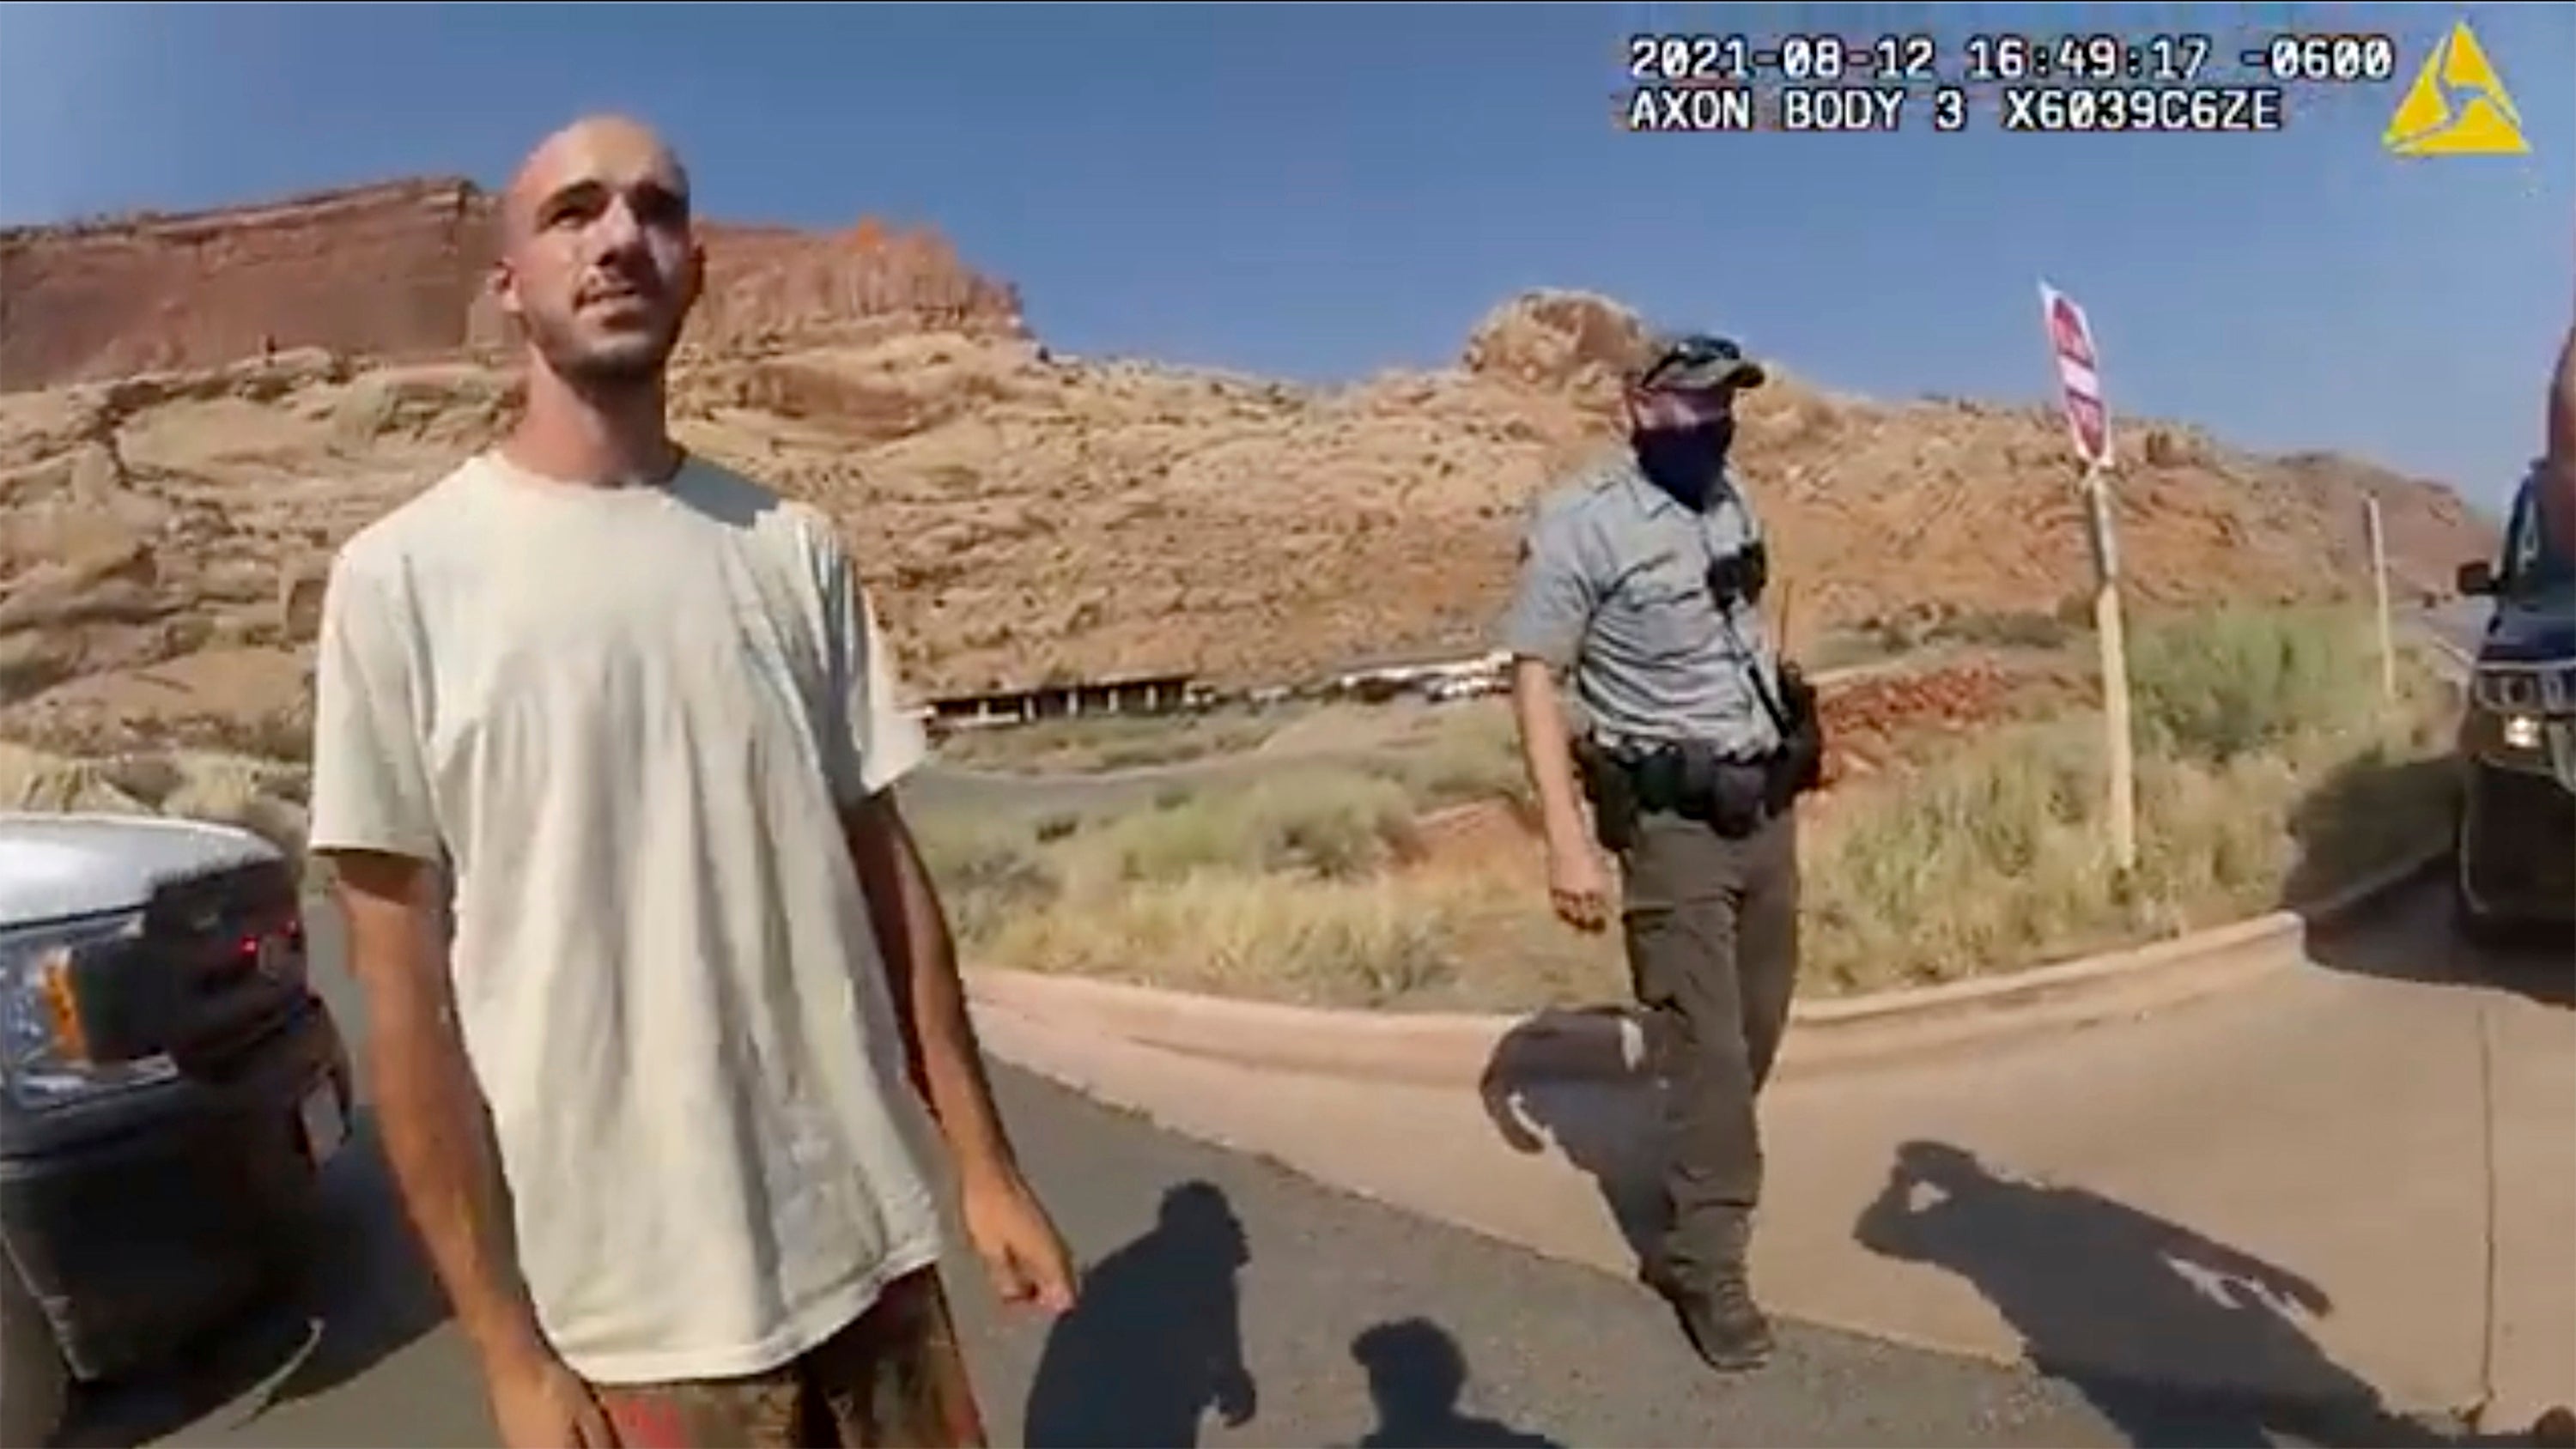 Brian Laundrie speaking to police in Moab, Utah, after a witness called 911 to say they had seen him assault Ms Petito